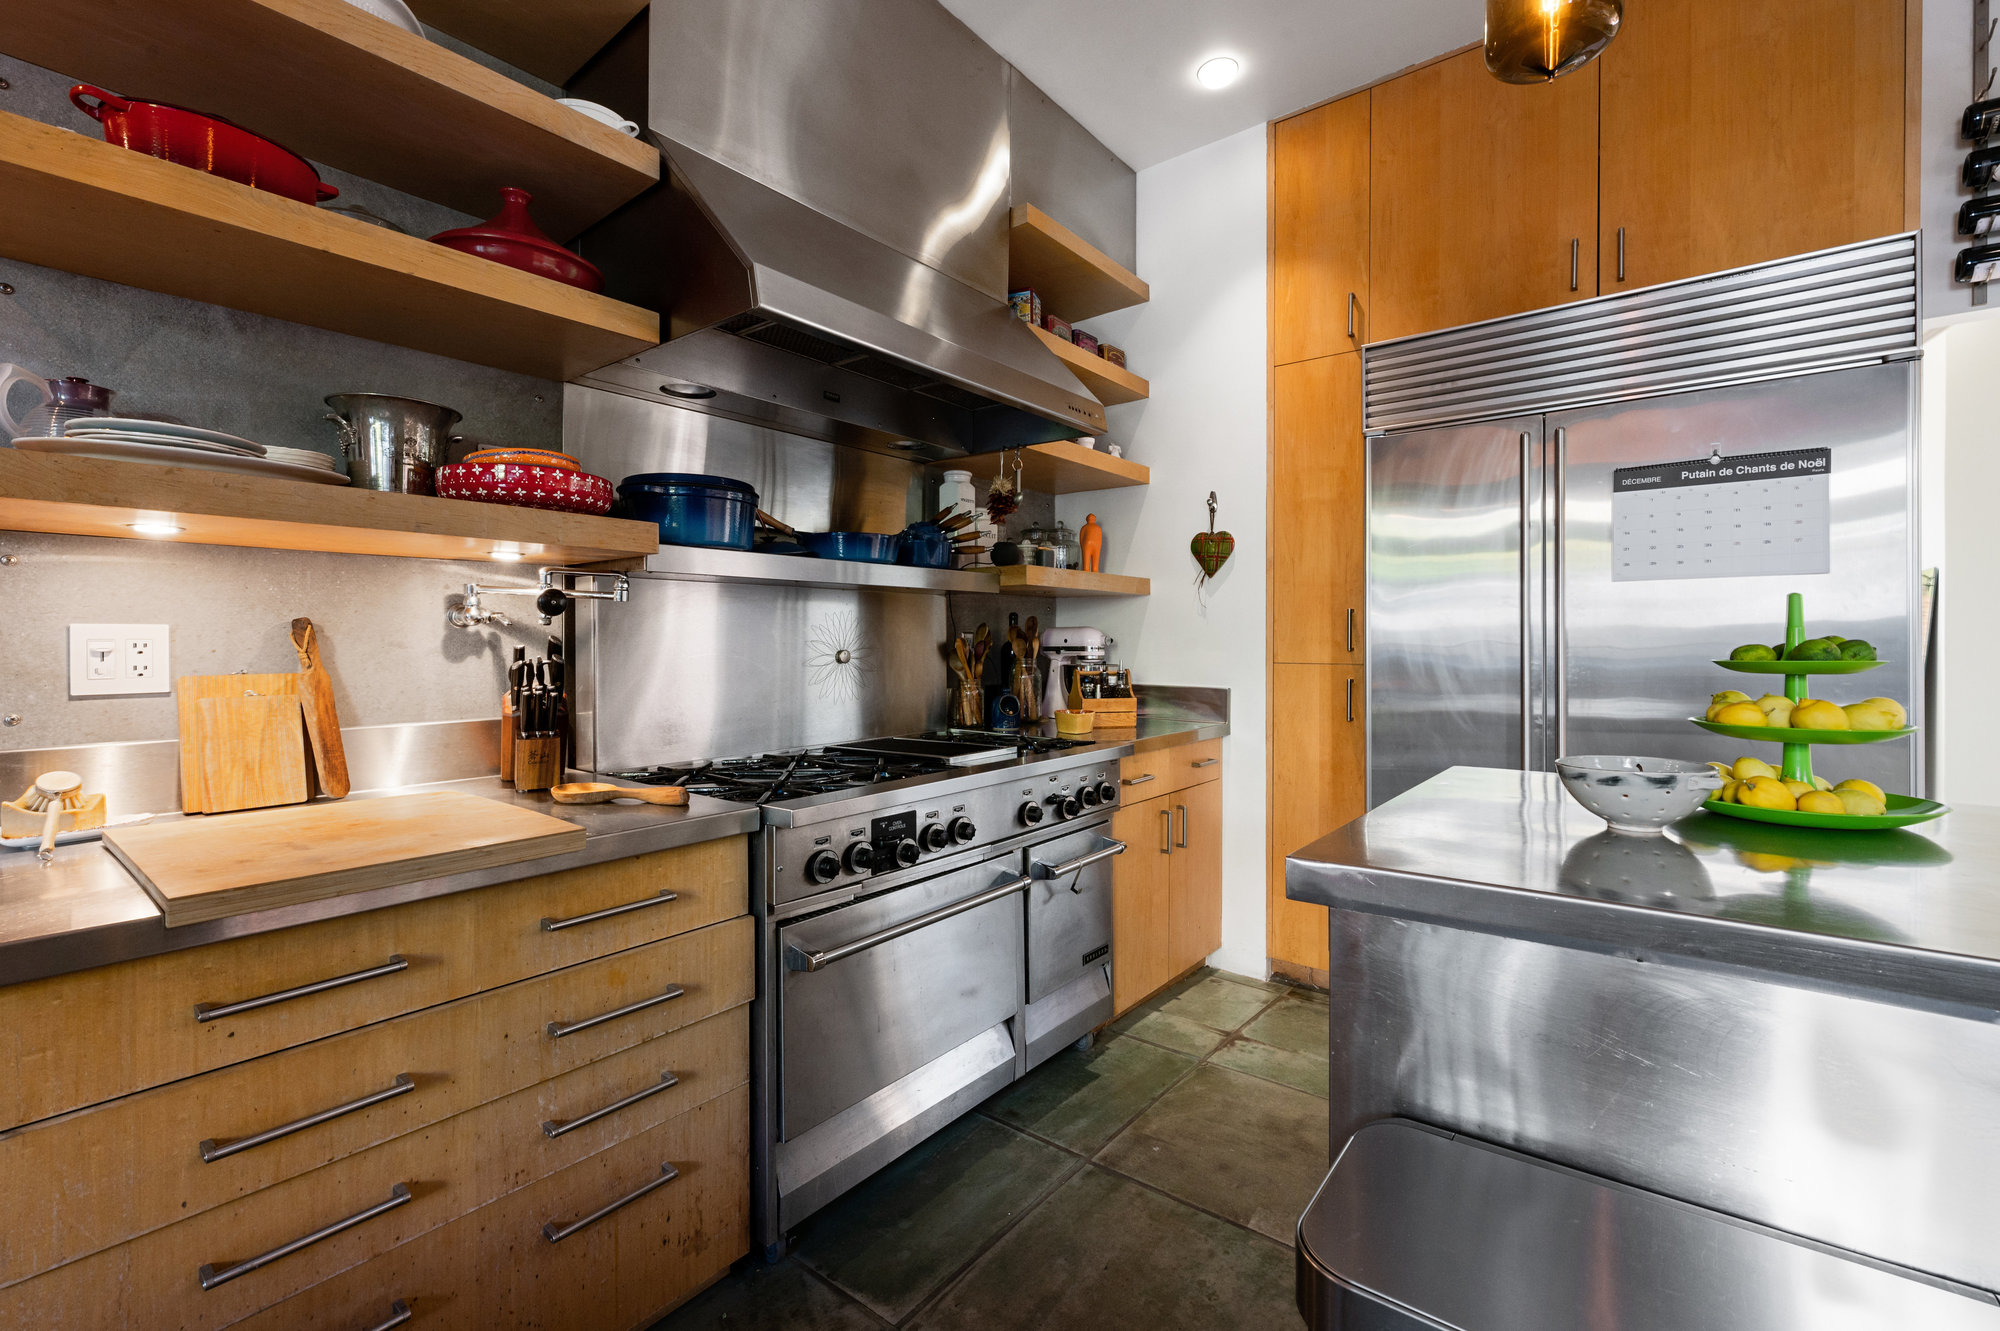 Property Photo: View of the cooking area, showing a large stainless steel range and oversized fridge and island 